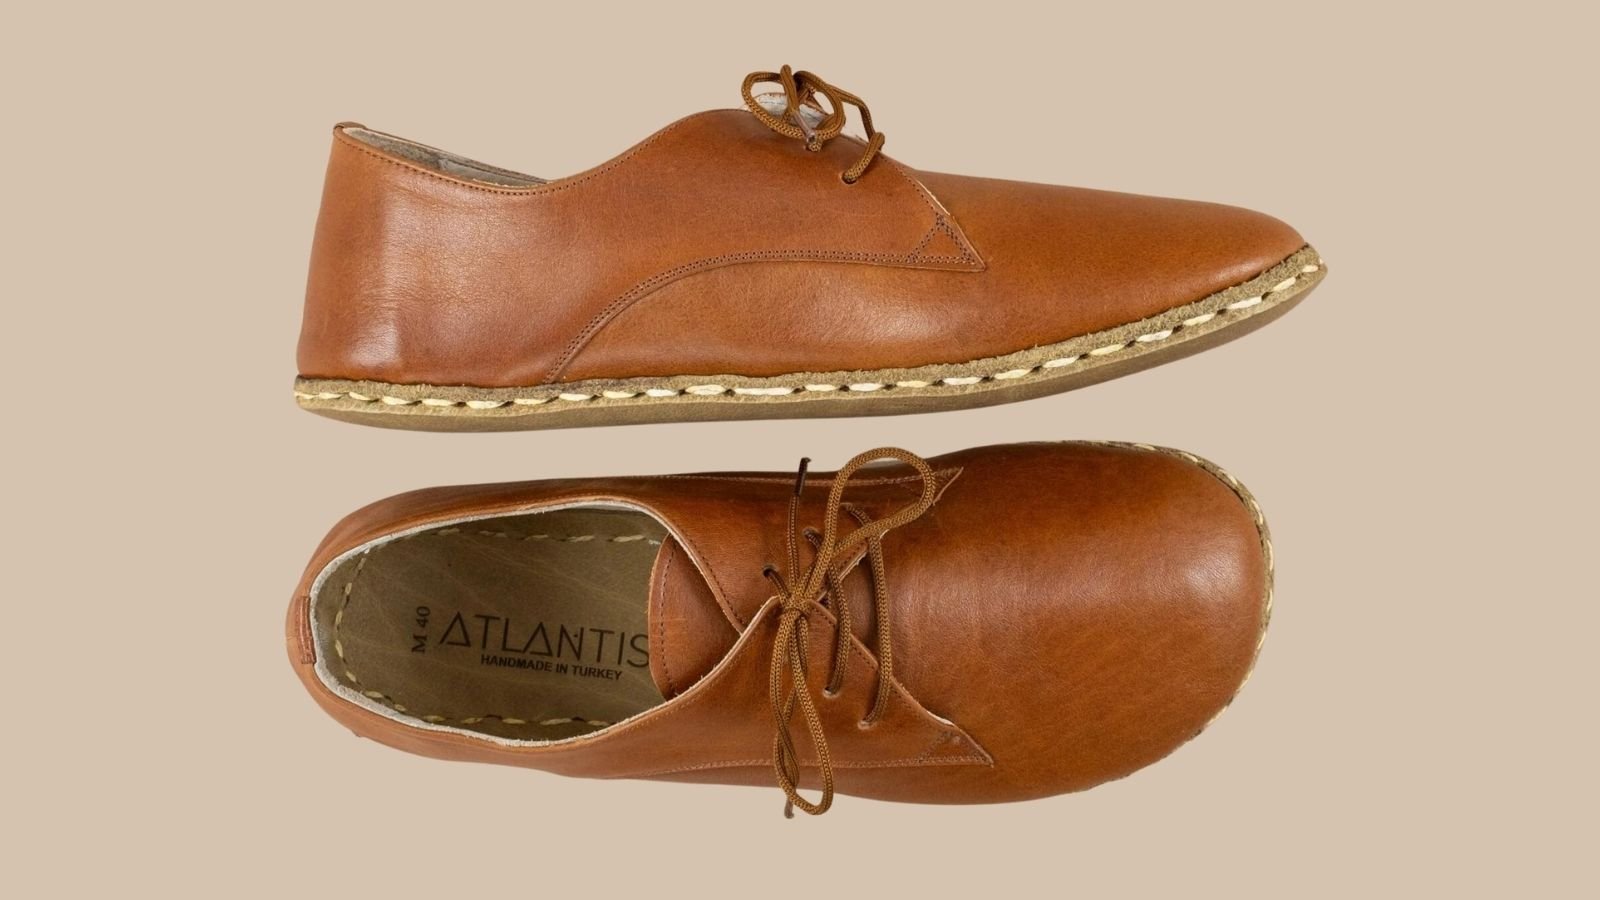 How to Wear Oxford Shoes for Men?